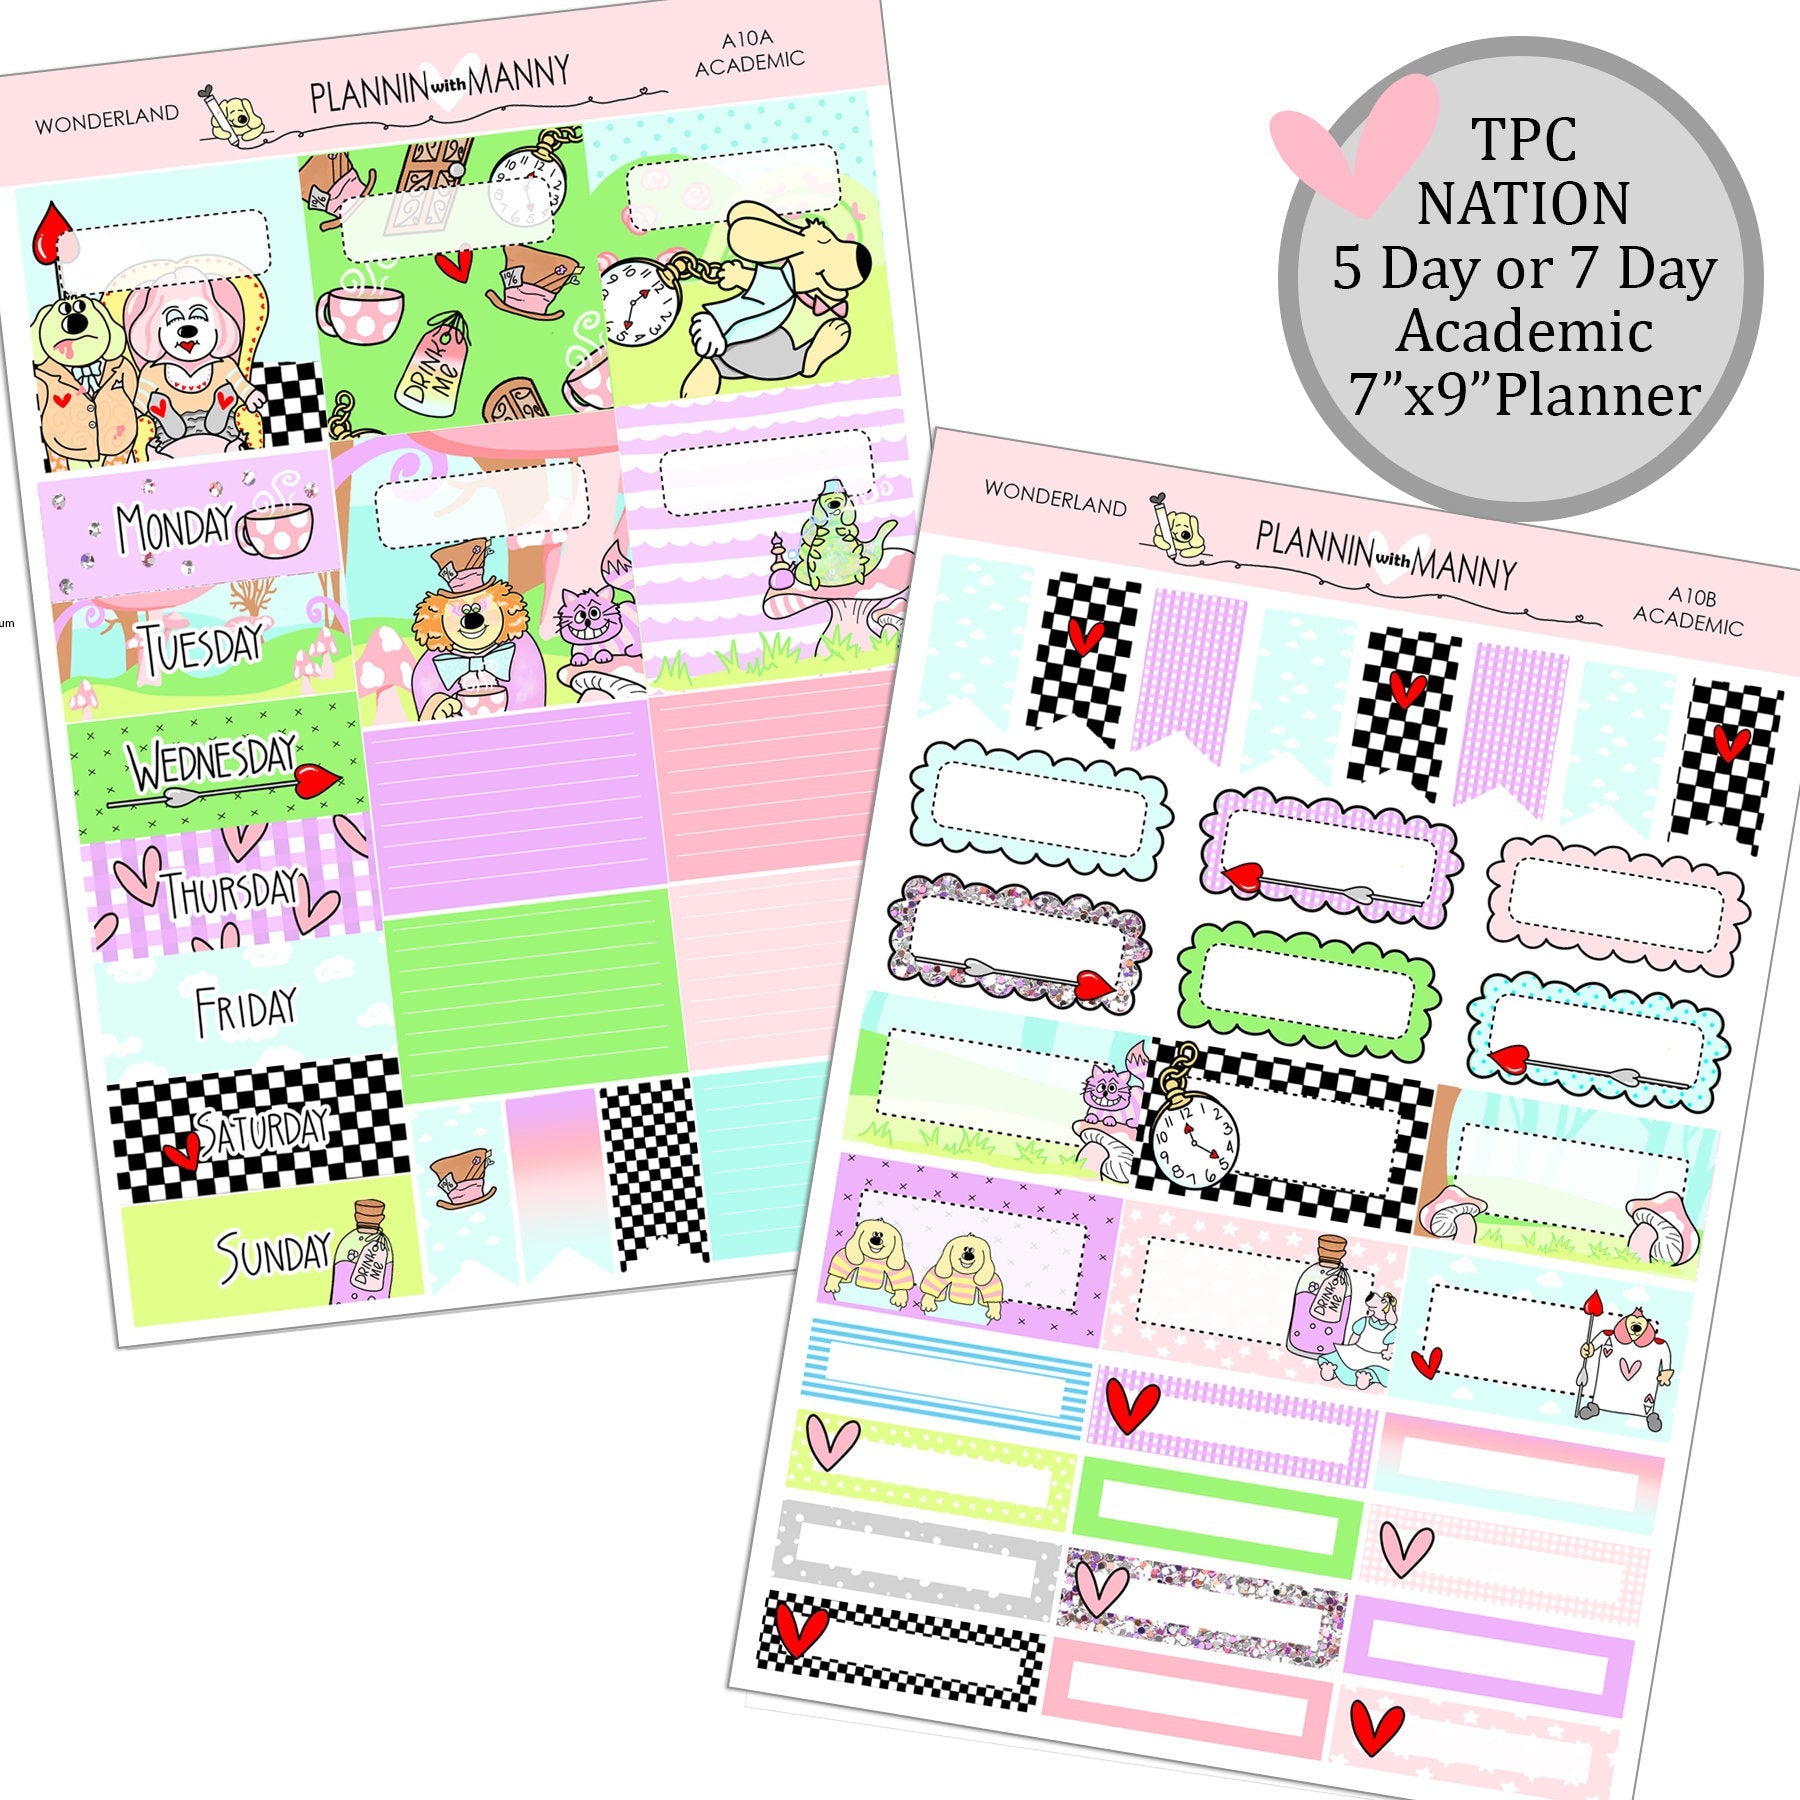 A10 TPC NATION ACADEMIC 5&7 Day Weekly Kit - Wonderland Collection